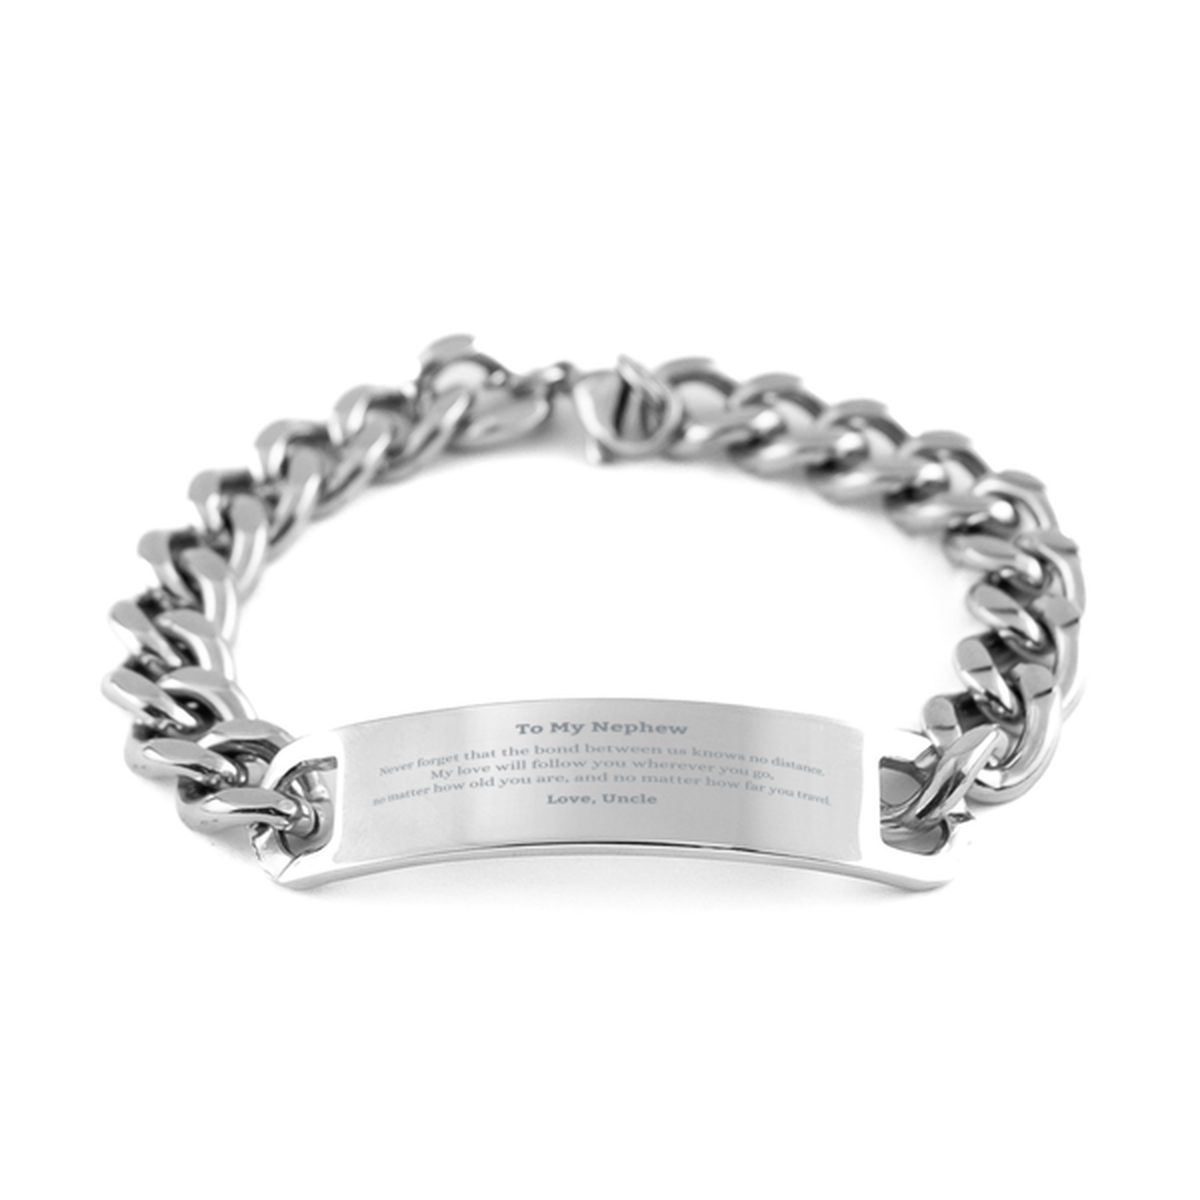 Nephew Birthday Gifts from Uncle, Adjustable Cuban Chain Stainless Steel Bracelet for Nephew Christmas Graduation Unique Gifts Nephew Never forget that the bond between us knows no distance. Love, Uncle